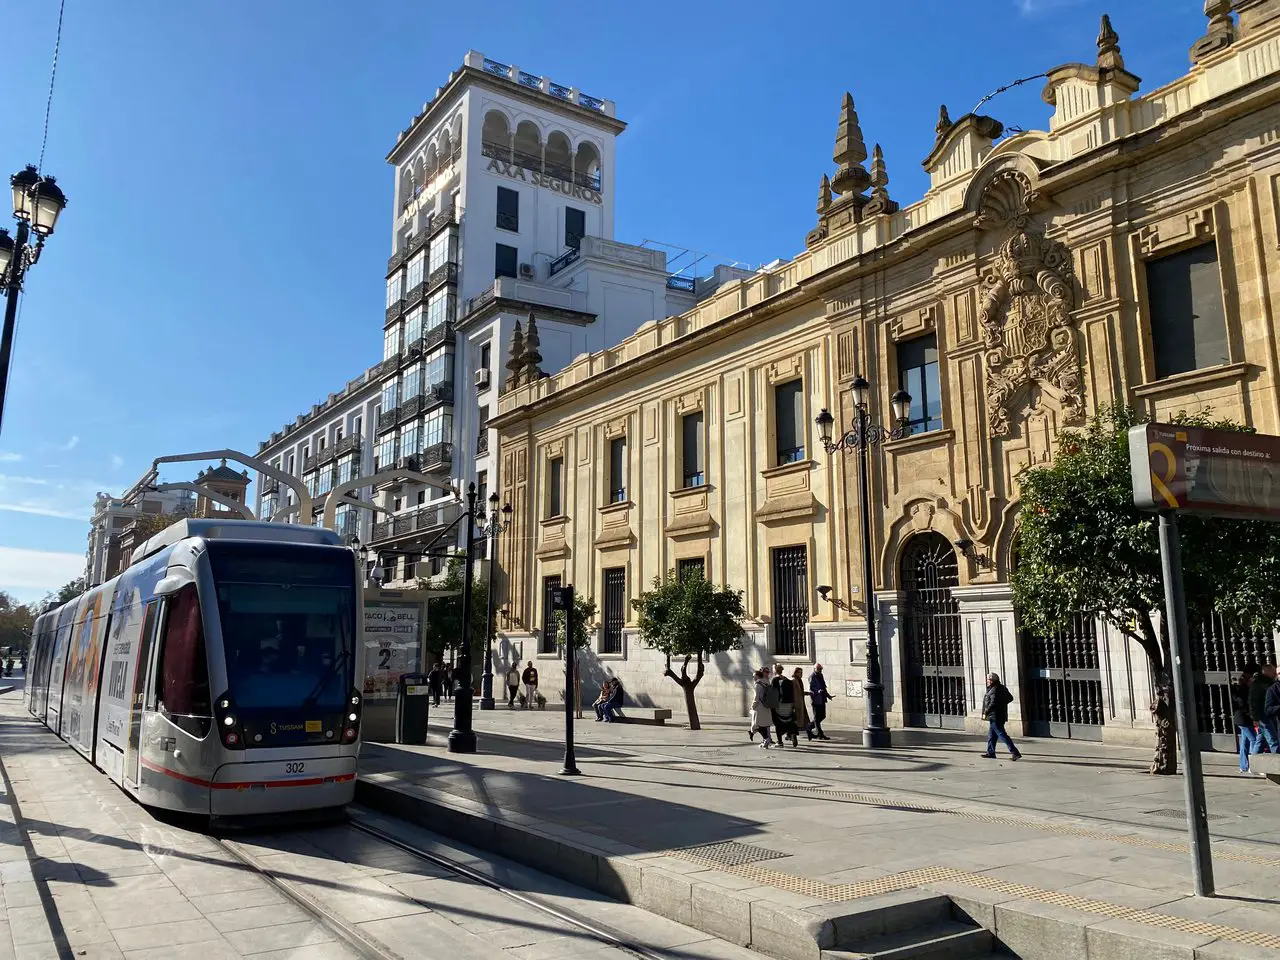 A tram drives in front of some buildings in Seville.